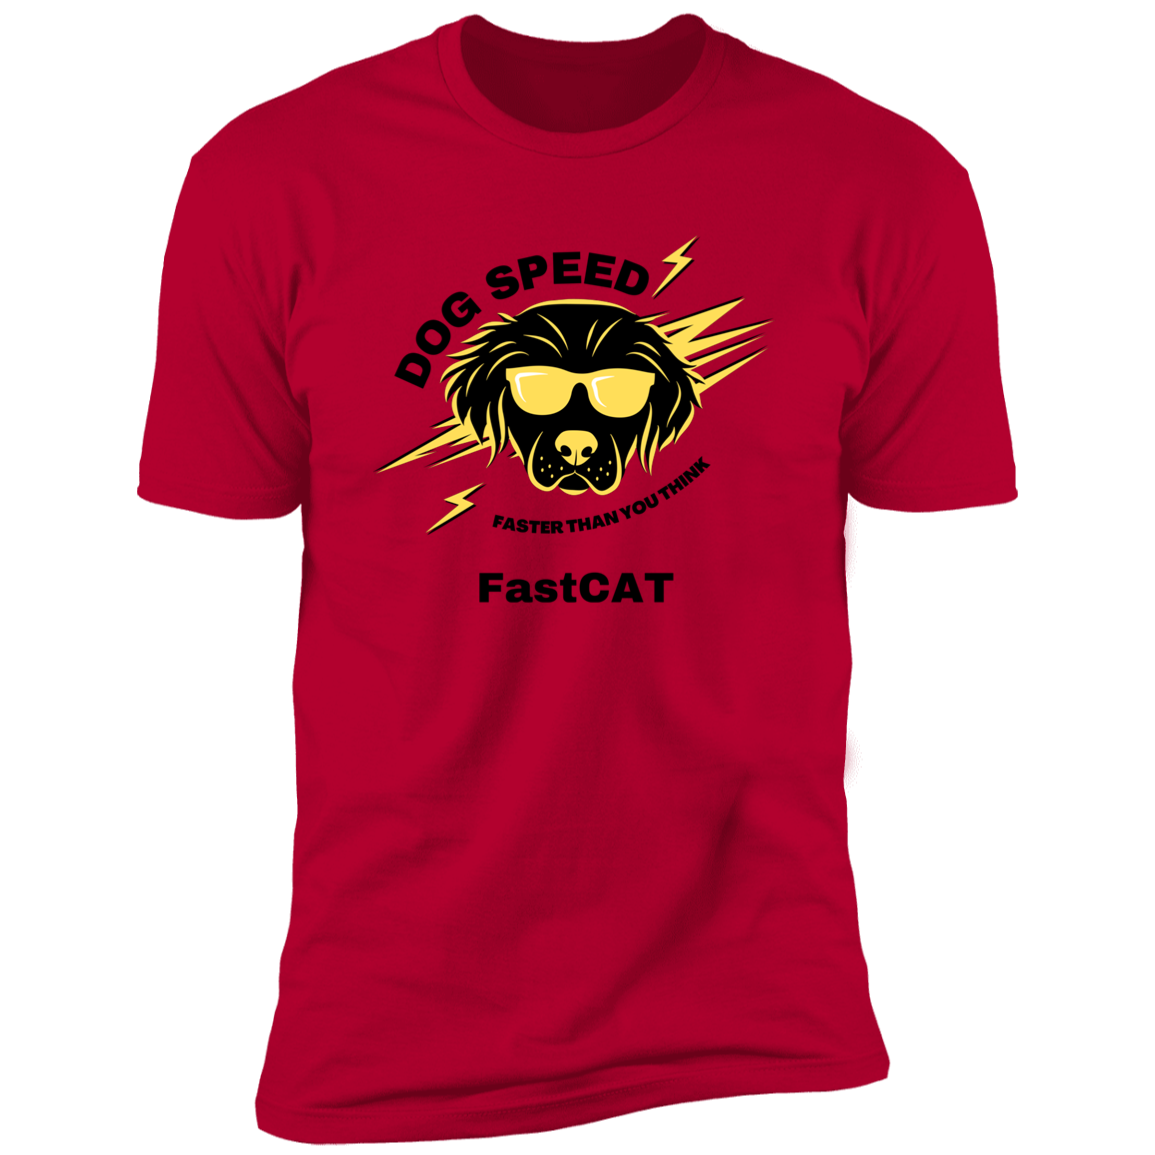 Dog Speed Faster Than You Think FastCAT T-shirt, FastCAT shirt dog shirt for humans, in red